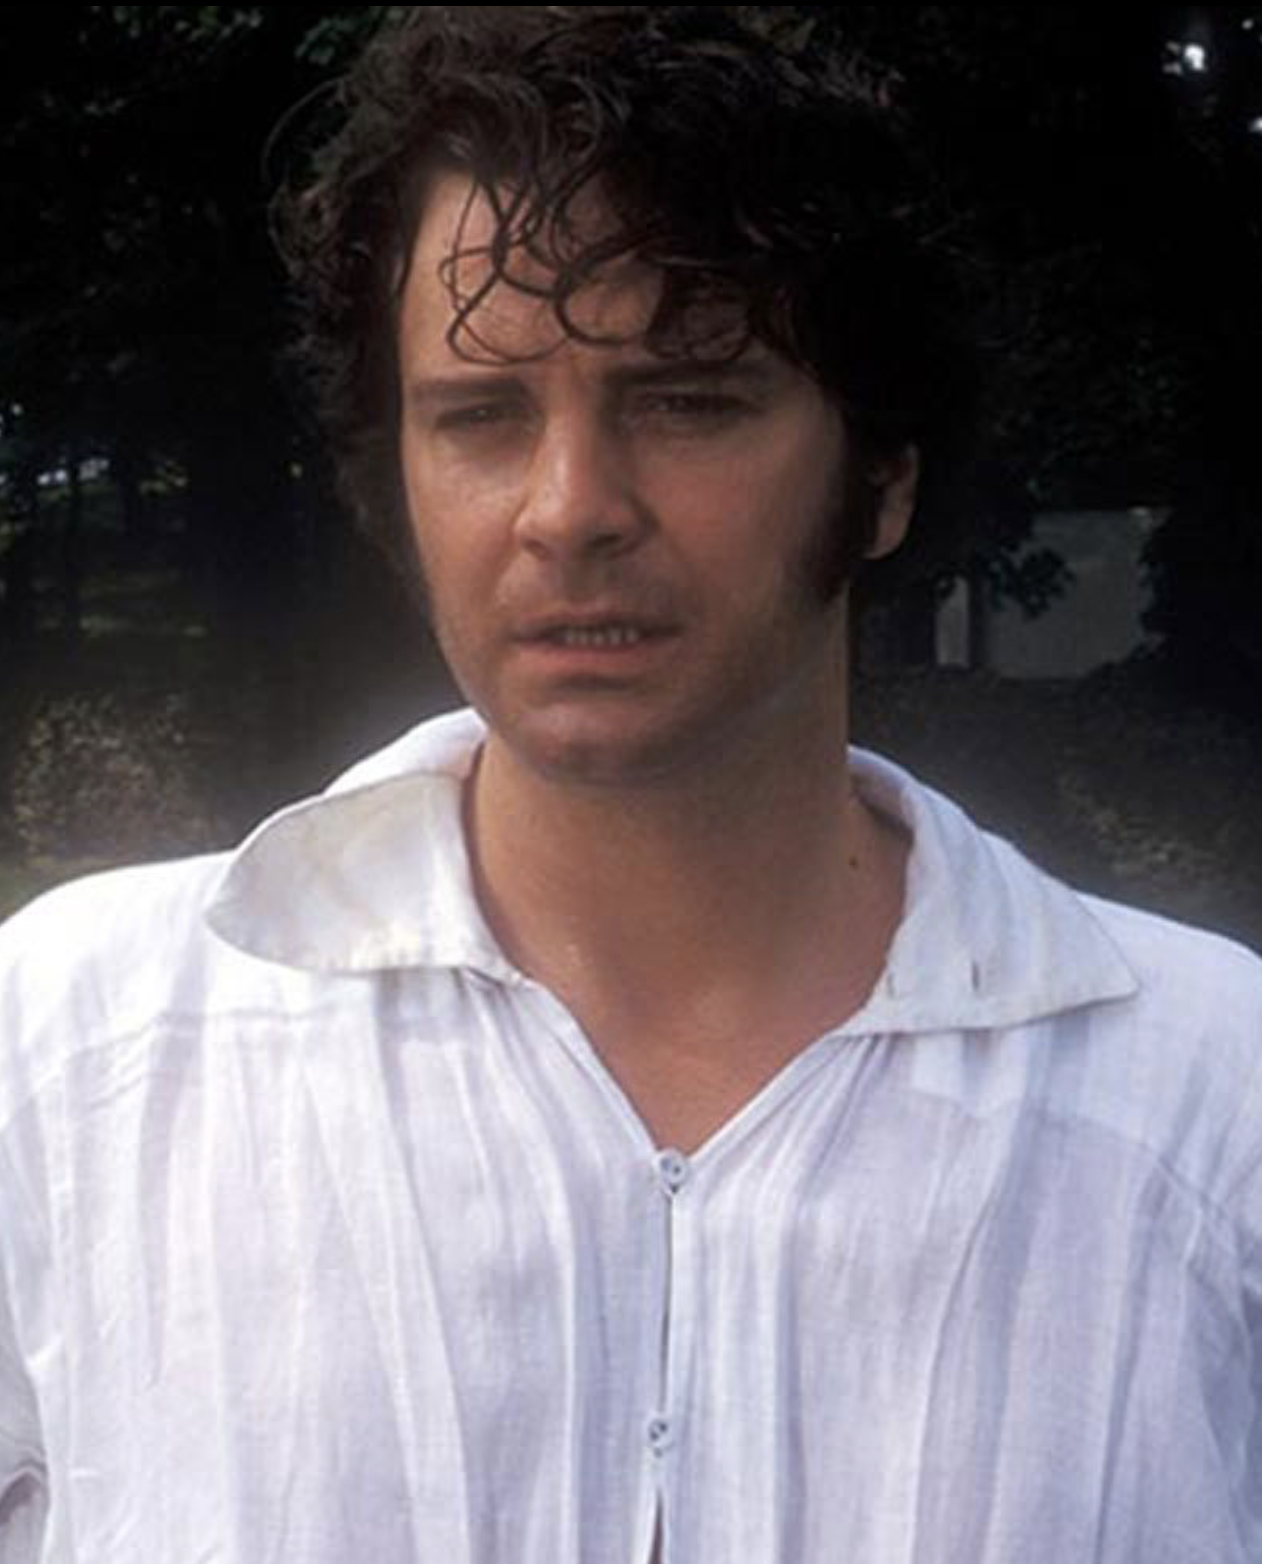 Colin Firth as Mr. Darcy in a collared white linen shirt that is soaking wet because he has just emerged from a pond. 